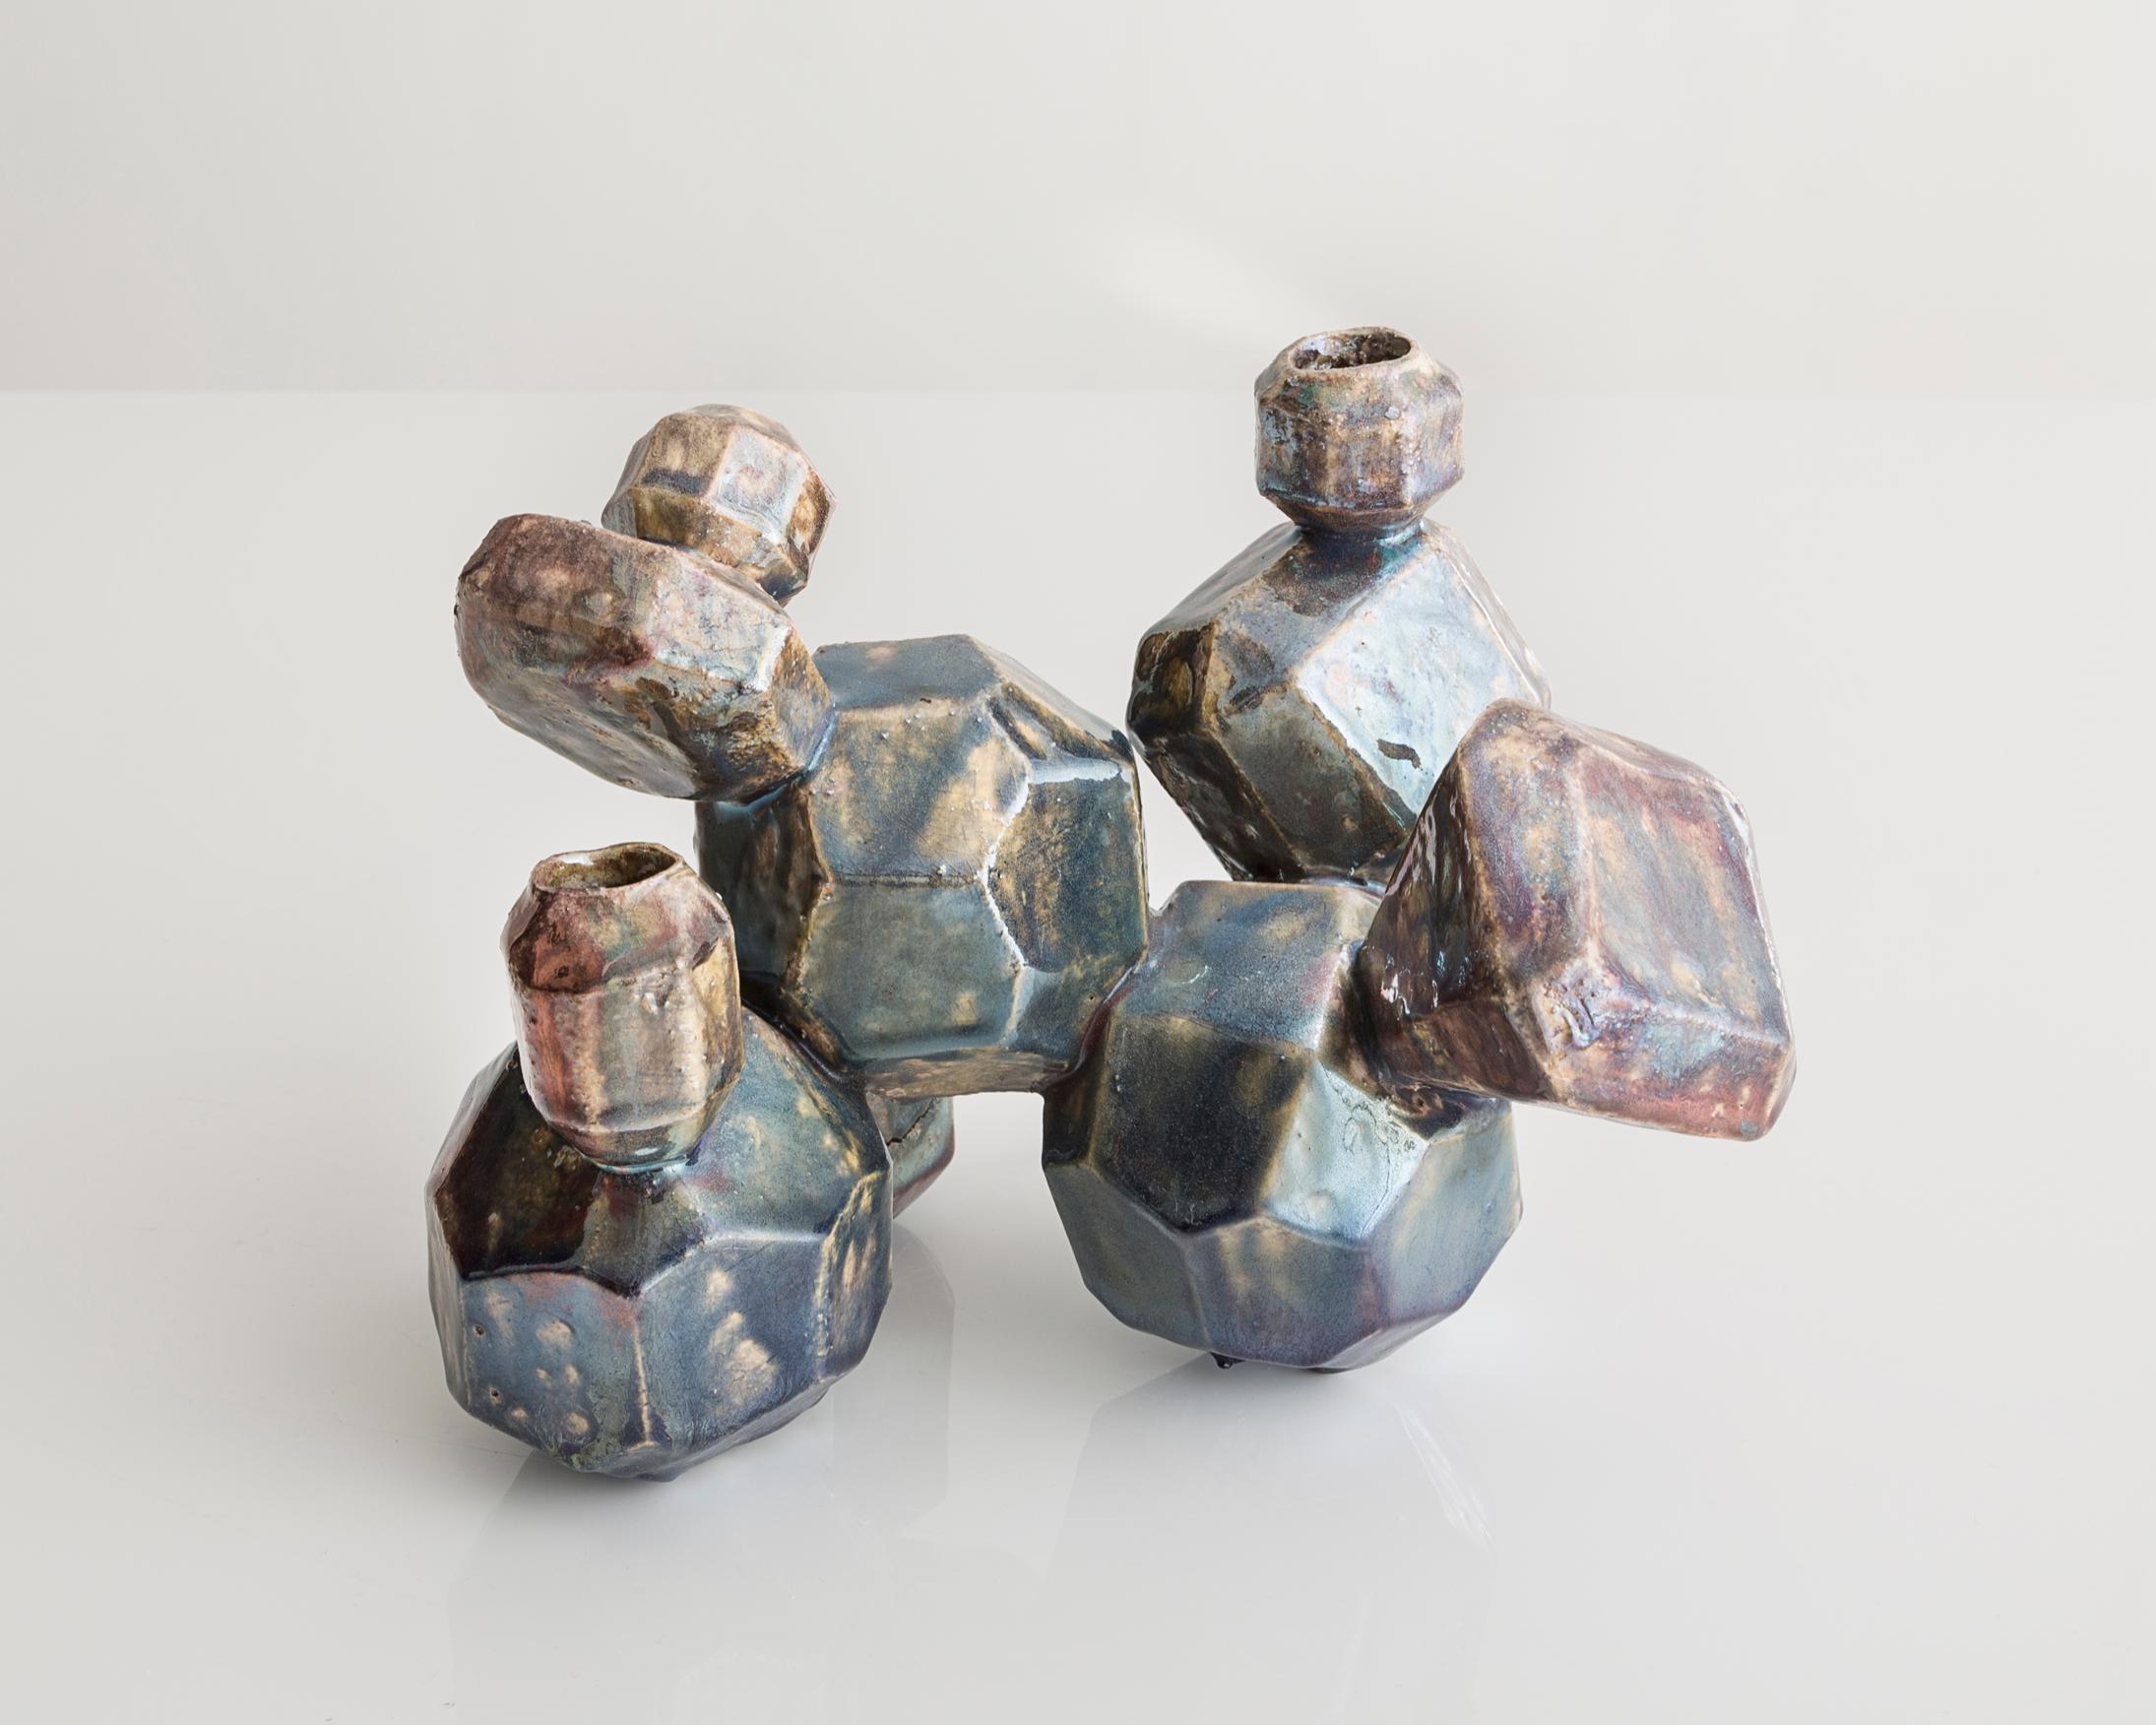 Glazed Cluster 11 from Cluster Series in Ceramic with a Raku Glaze, Made by Kelly Lamb